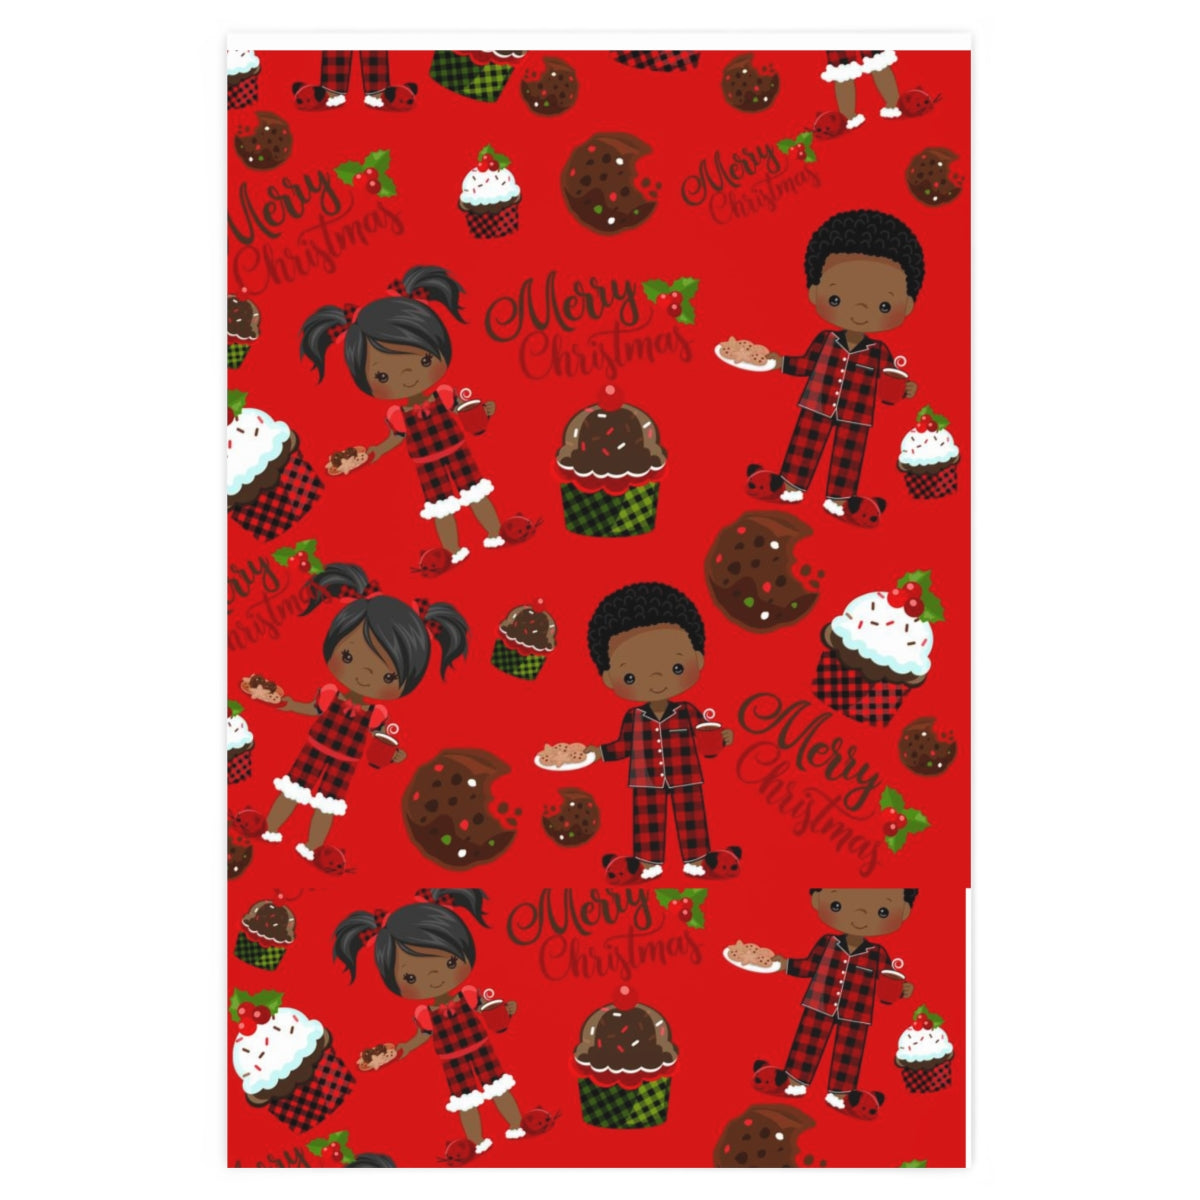 Cookies and Cupcakes Christmas Wrapping Paper